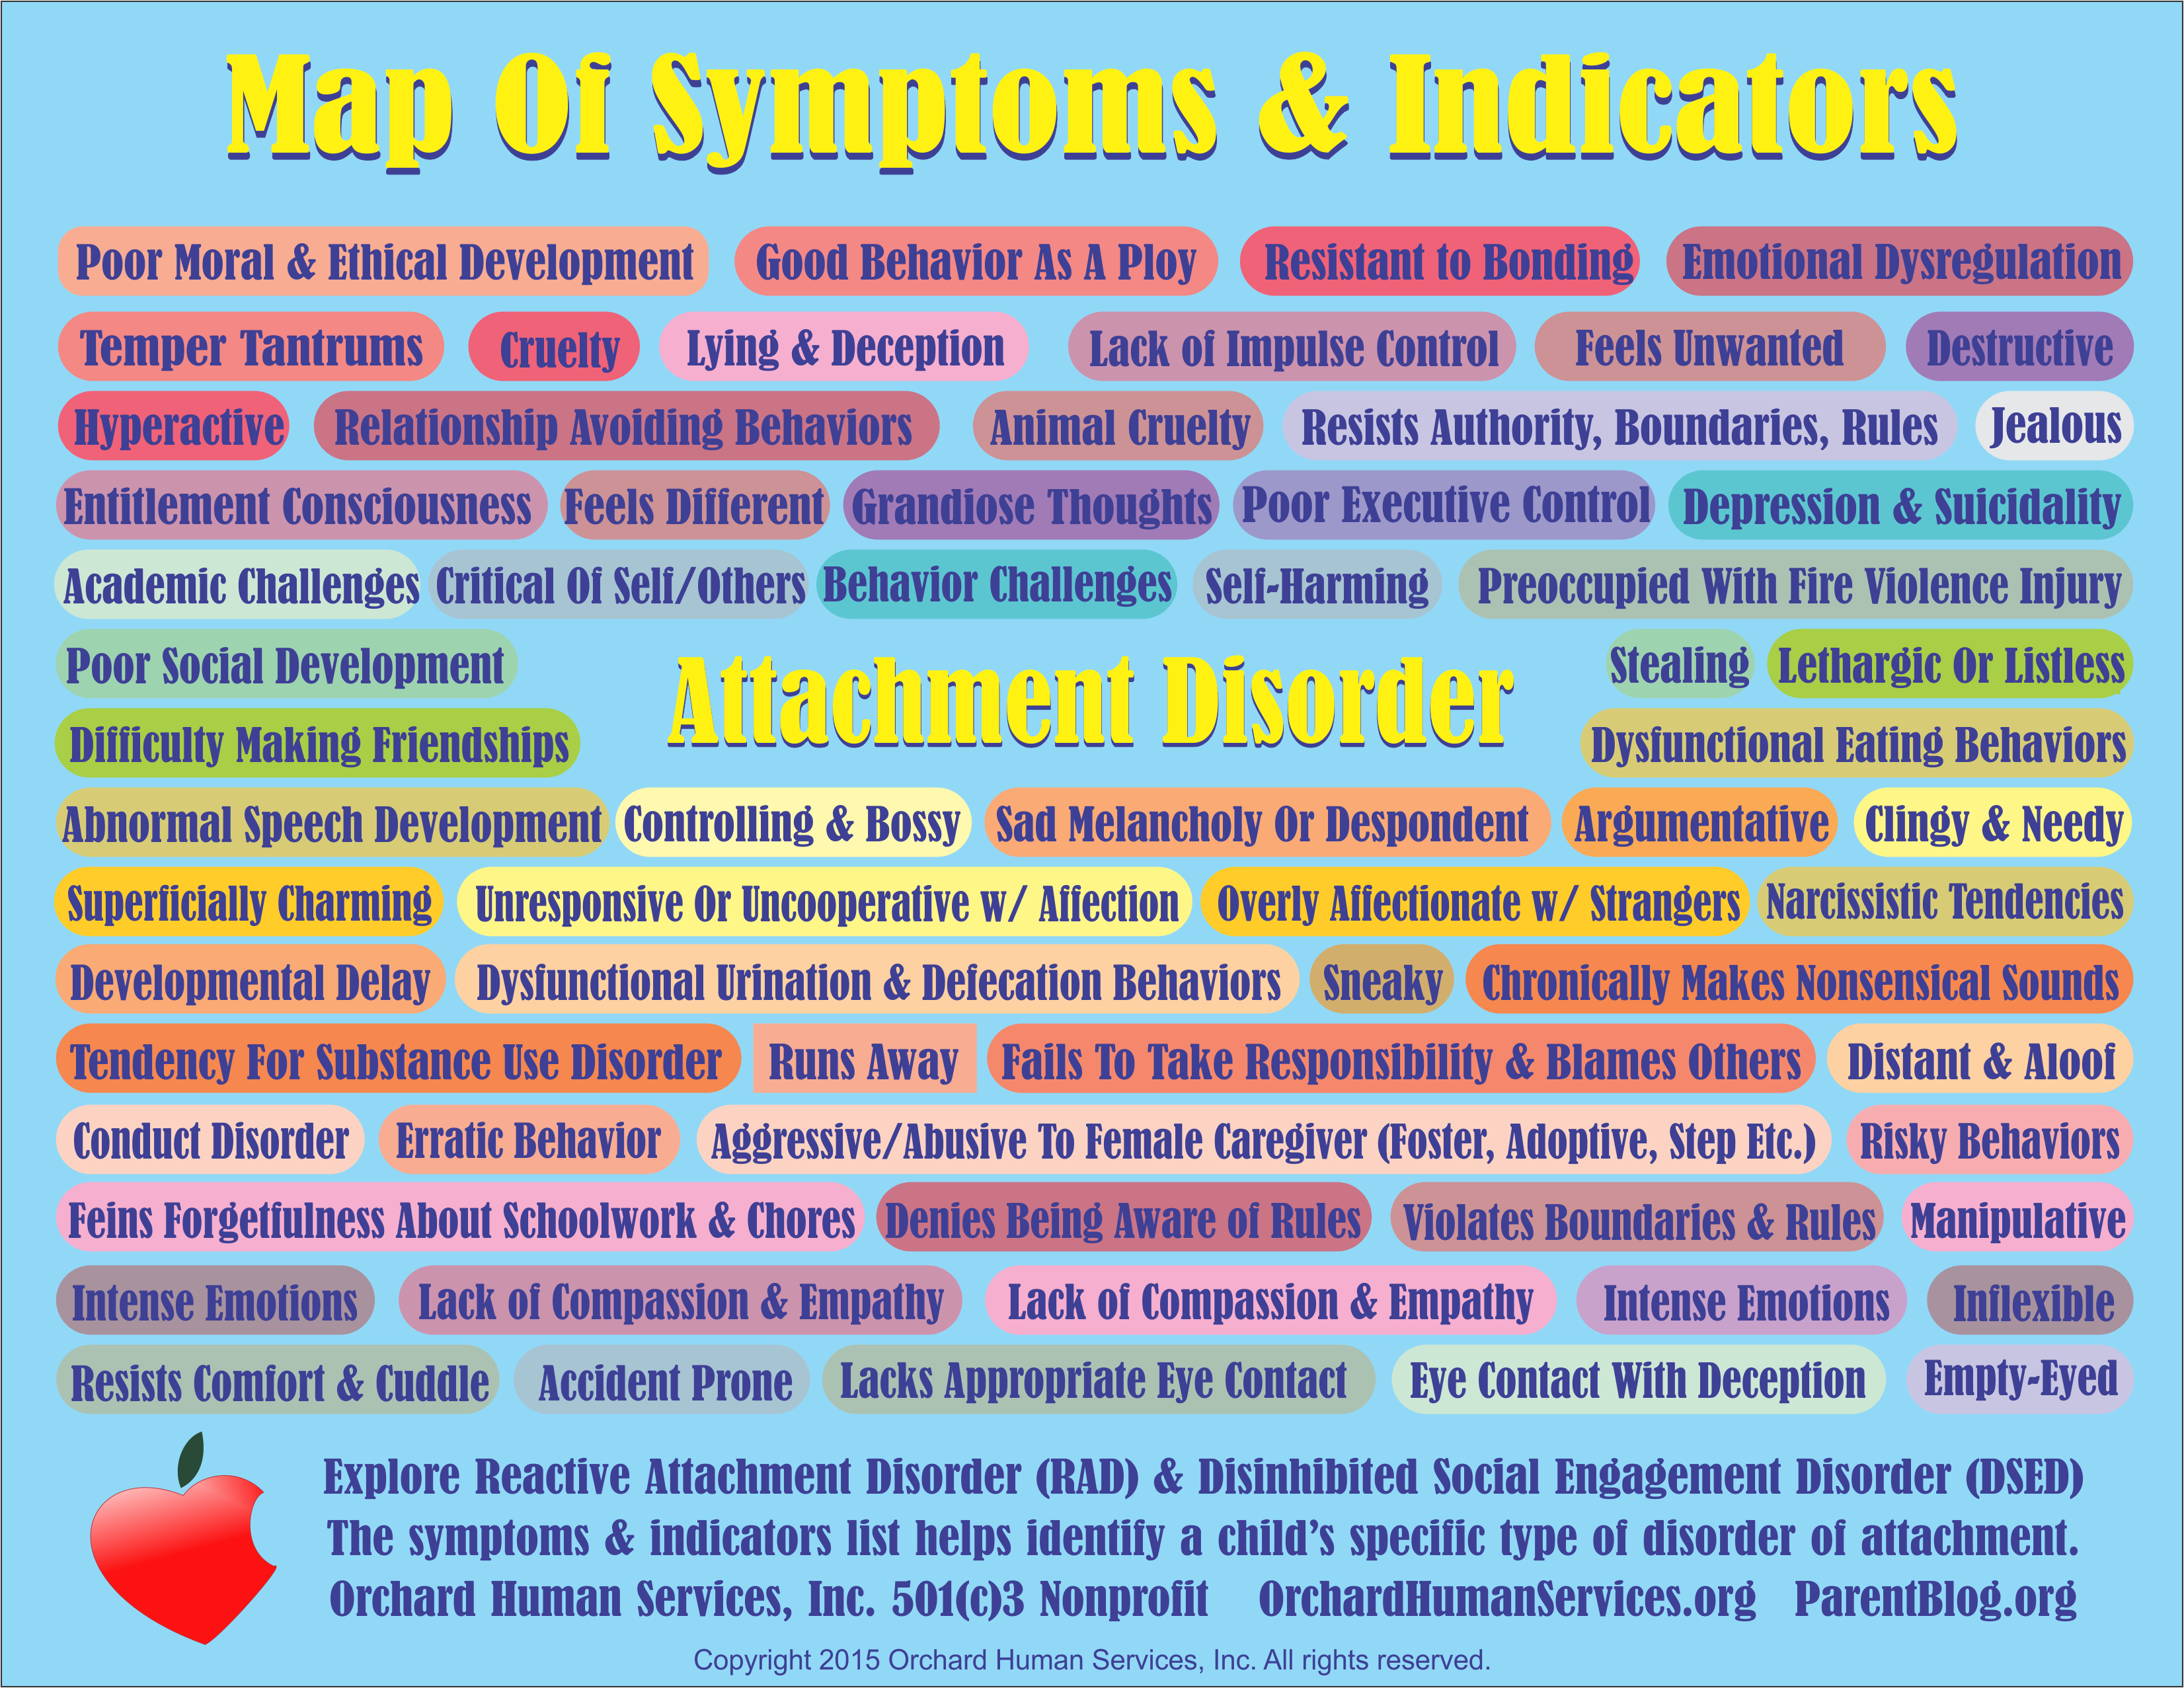 Map of Symptoms and Indicators for Attachment Disorders including RAD and DSED from OrchardHumanServices.org  ParentBlog.org and DarleenClaire.com